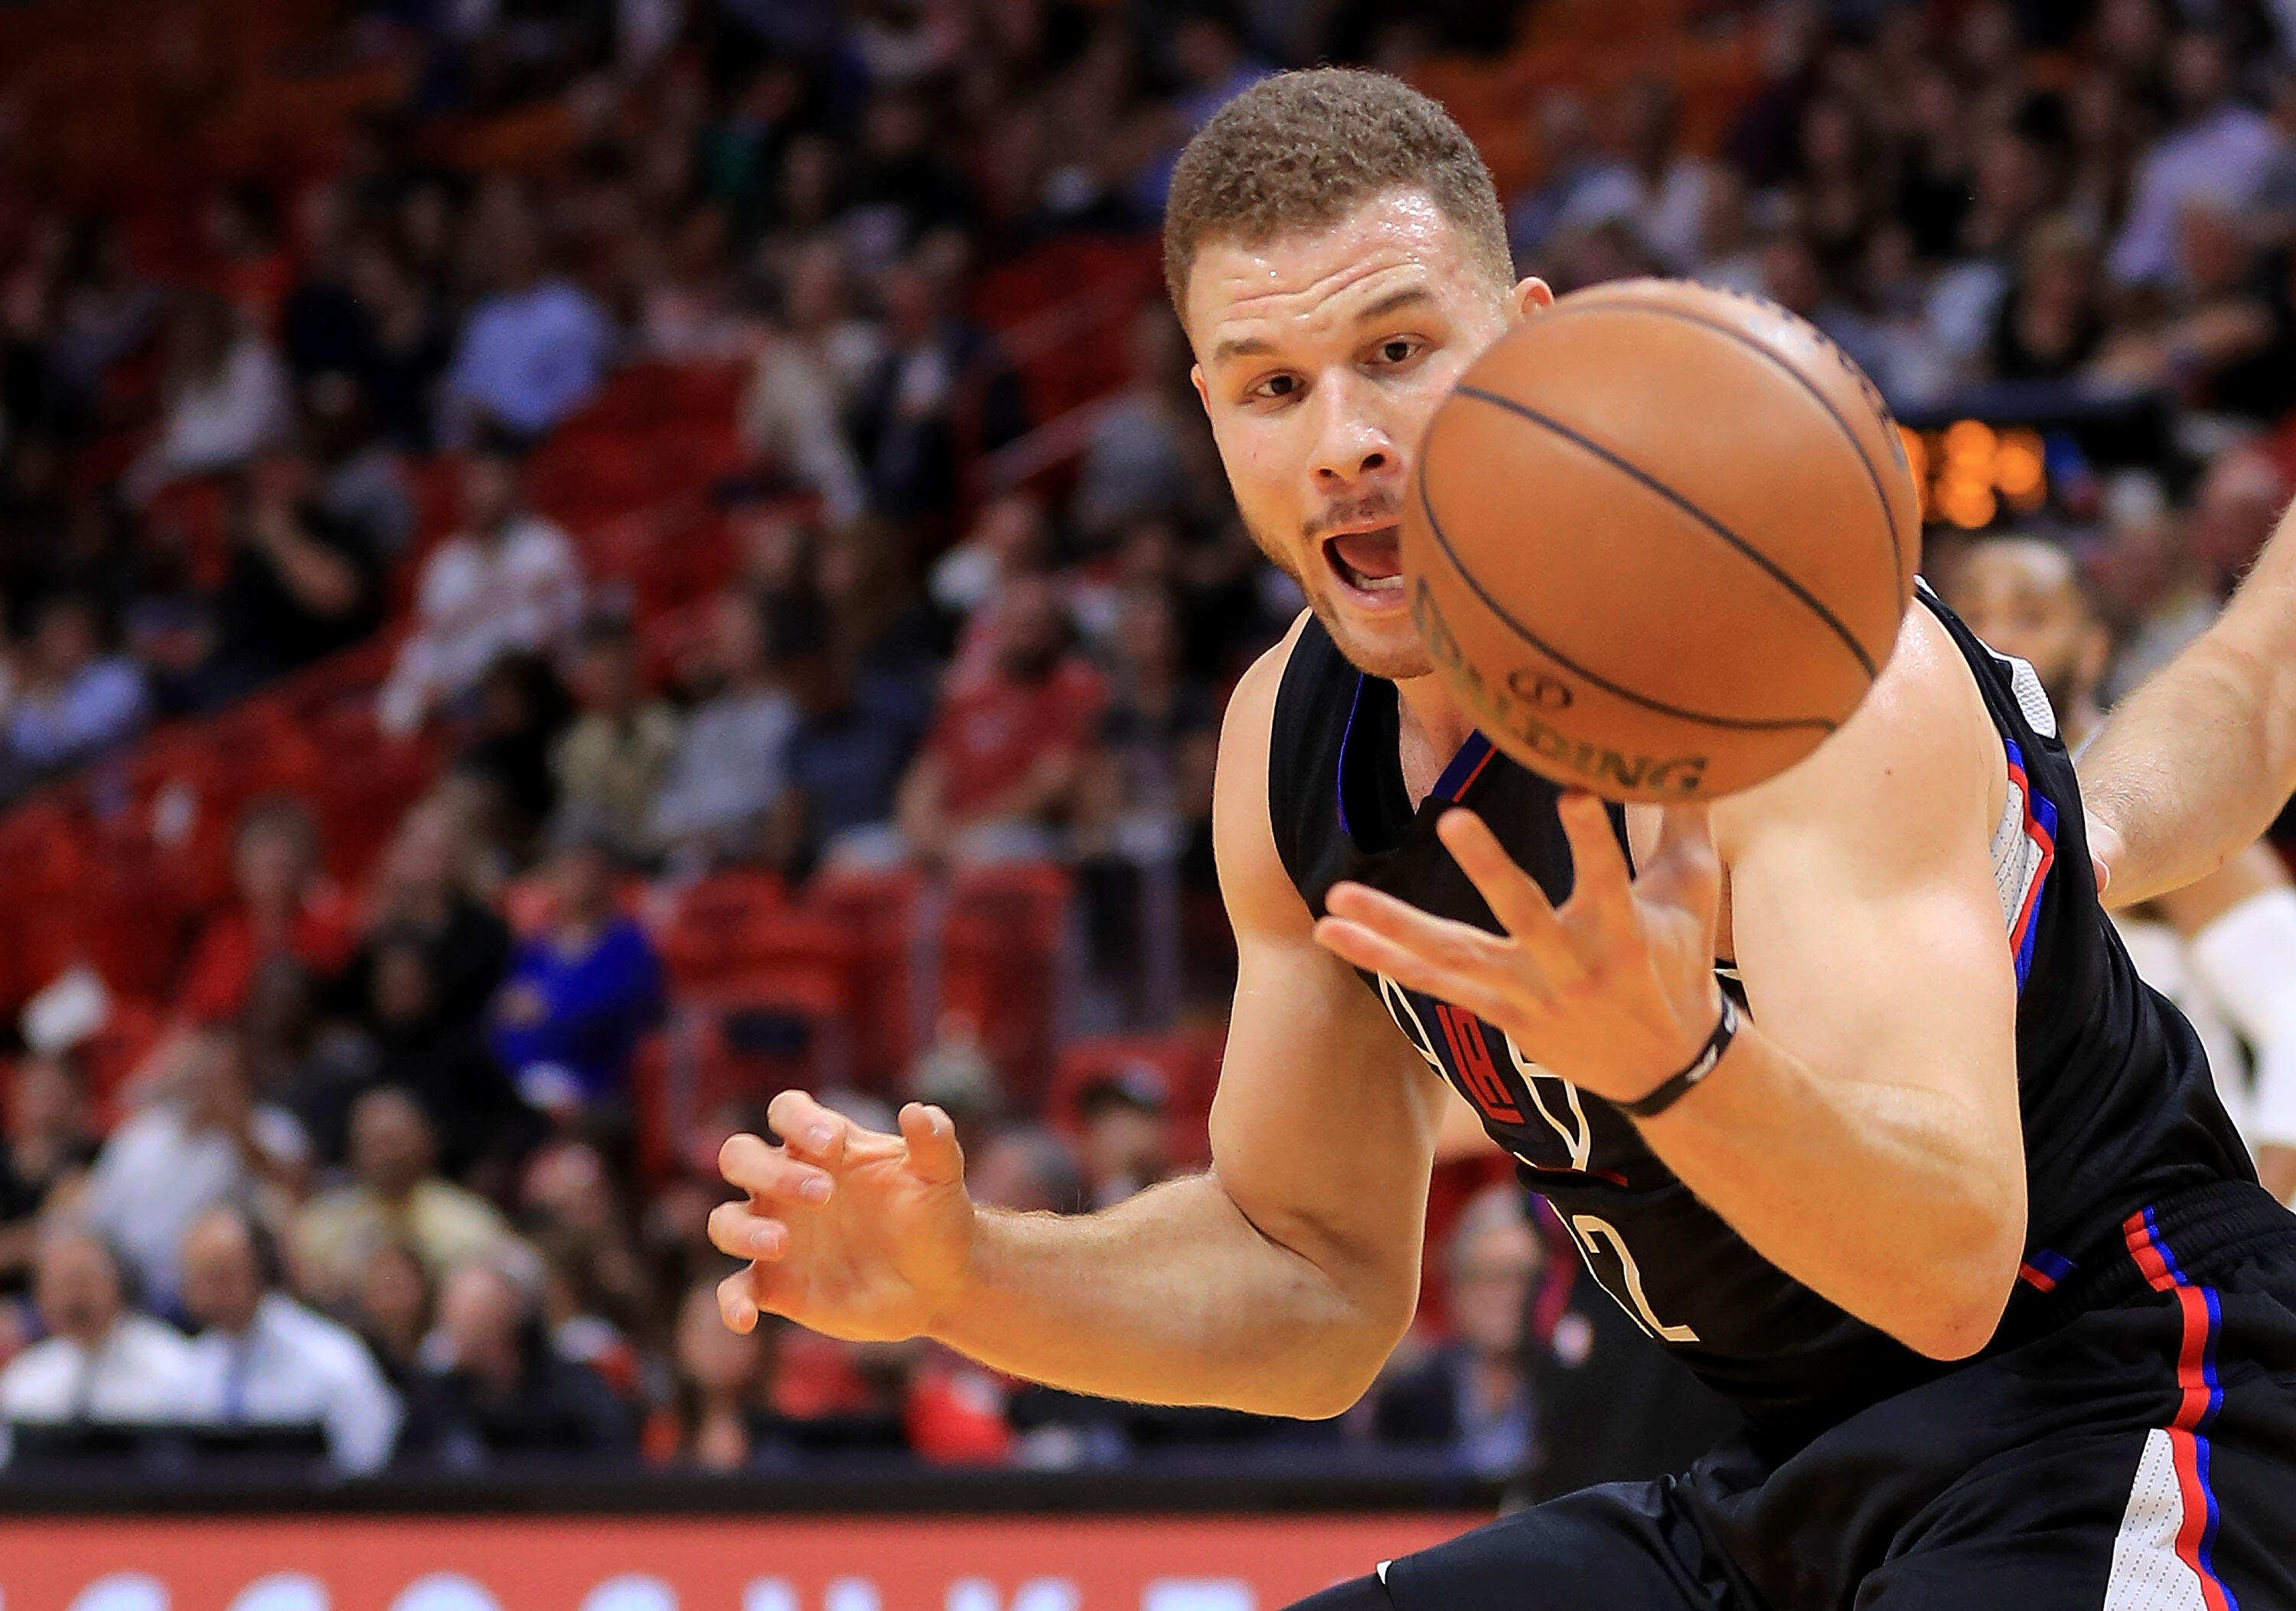 MIAMI, FL - DECEMBER 16:  Blake Griffin #32 of the LA Clippers chases down a loose ball during a game against the Miami Heat at American Airlines Arena on December 16, 2016 in Miami, Florida. NOTE TO USER: User expressly acknowledges and agrees that, by d